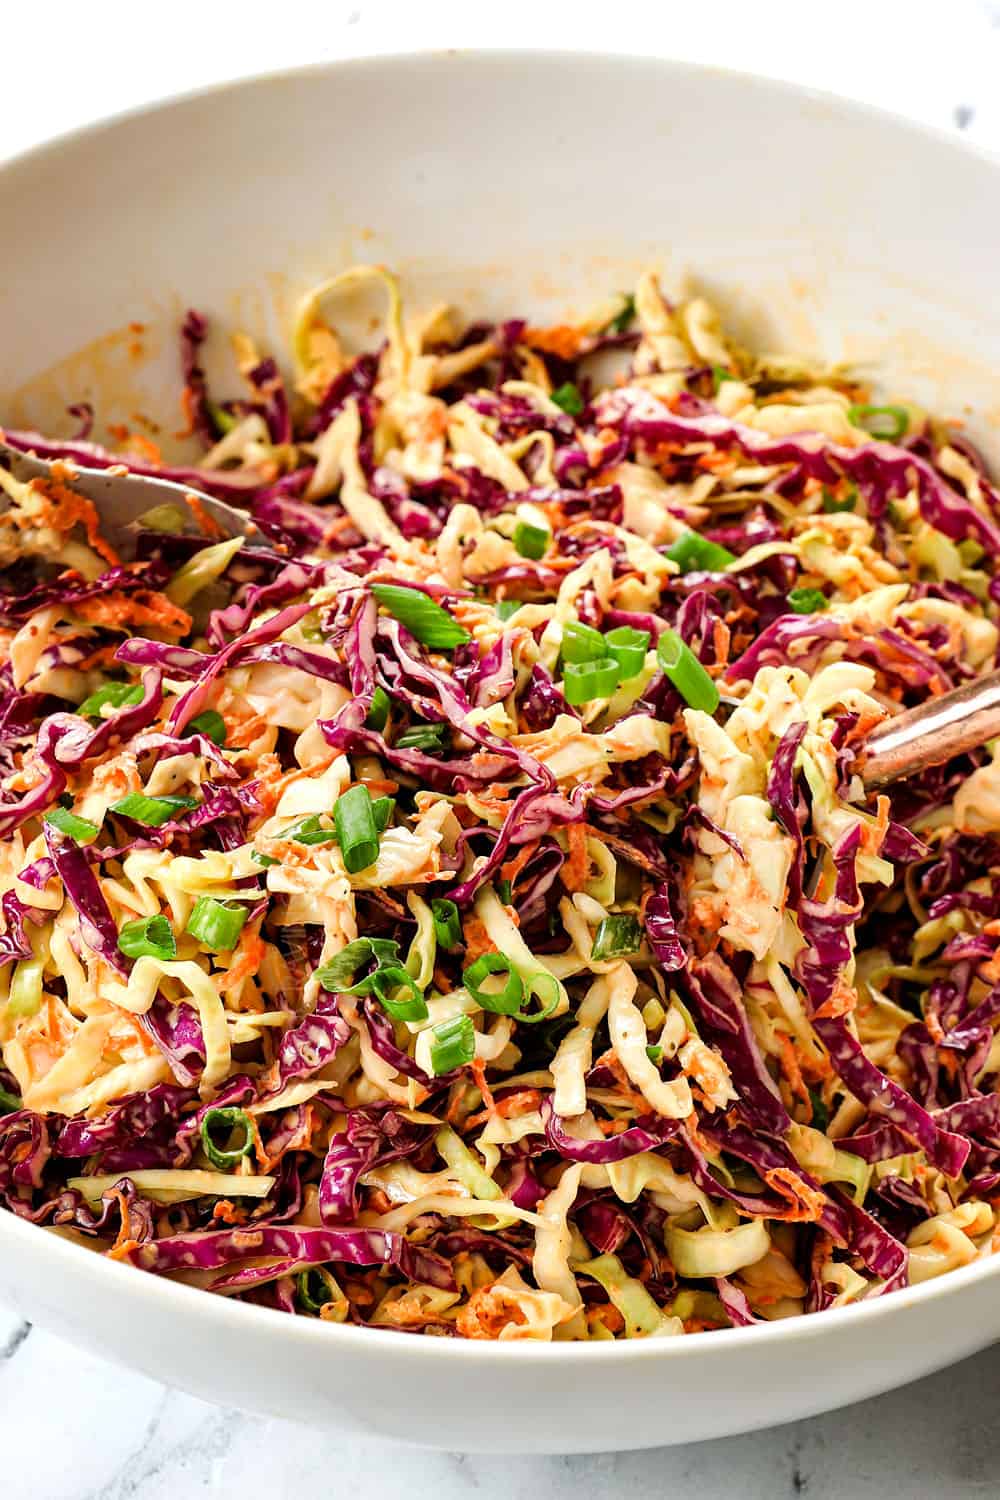 showing how to make coleslaw recipe by tossing all of the coleslaw ingredients together